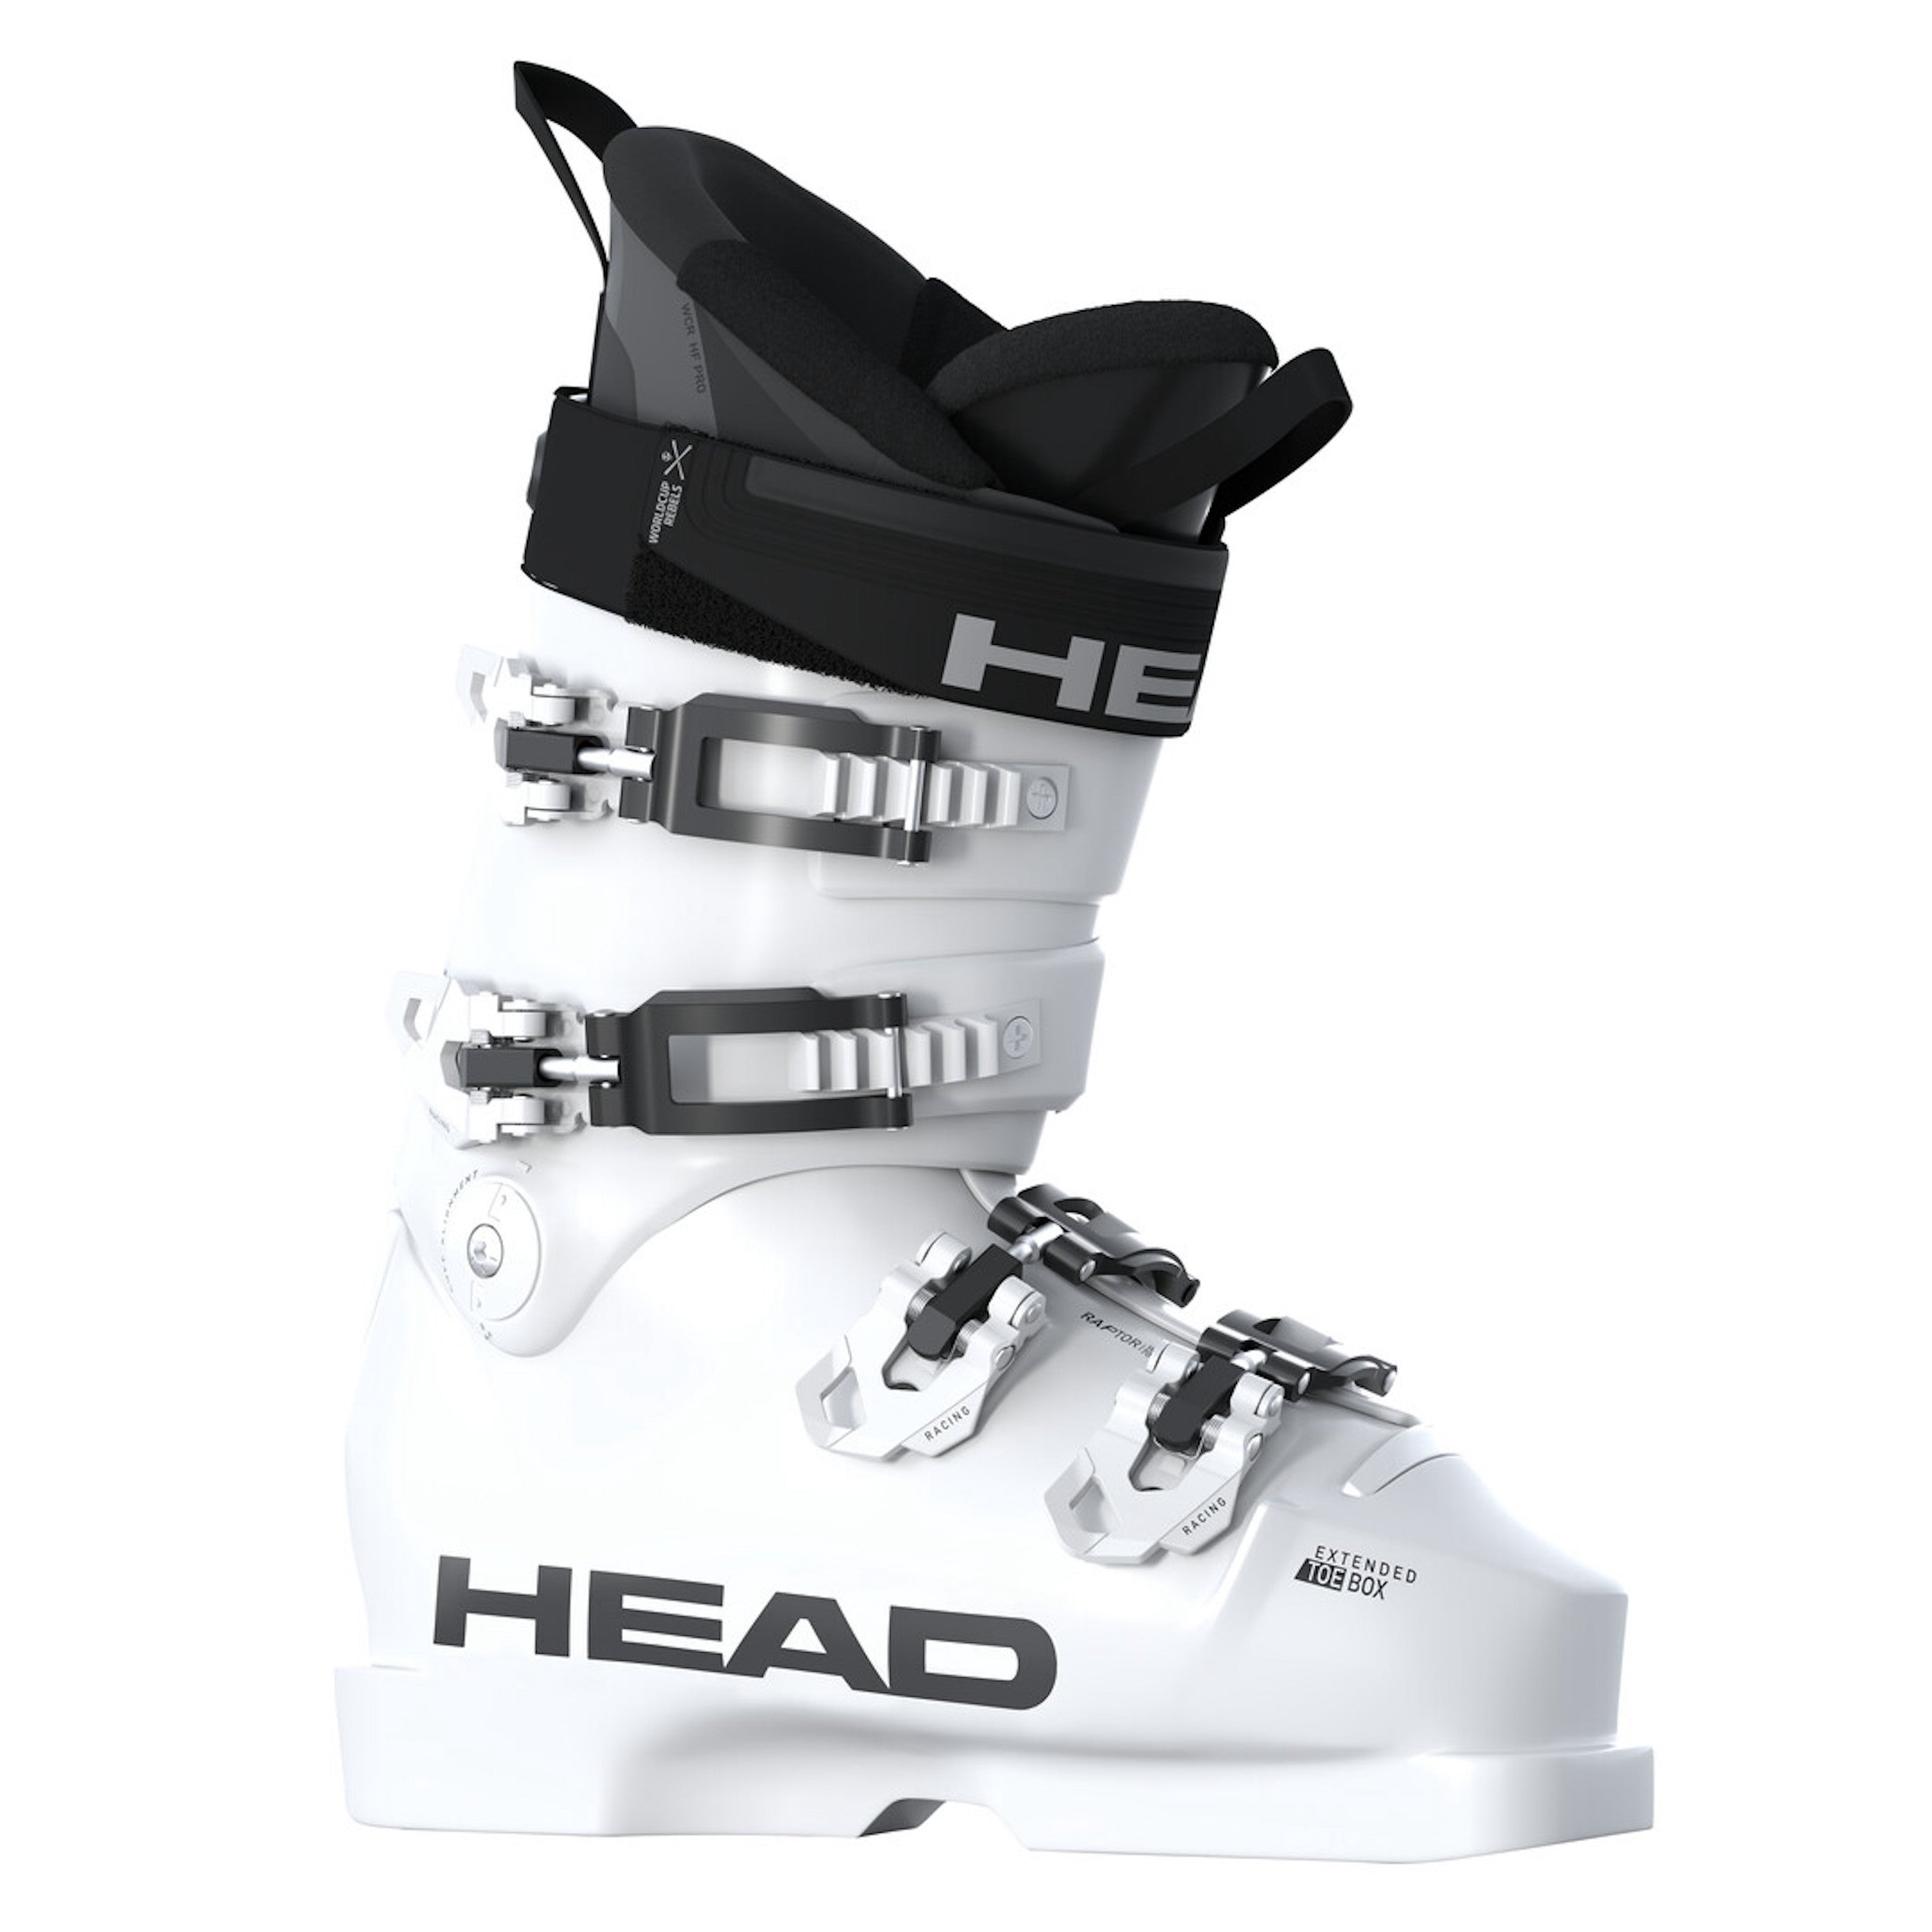 Junior Head Raptor WCR 70 ski boot, all white with black accents and black power strap.